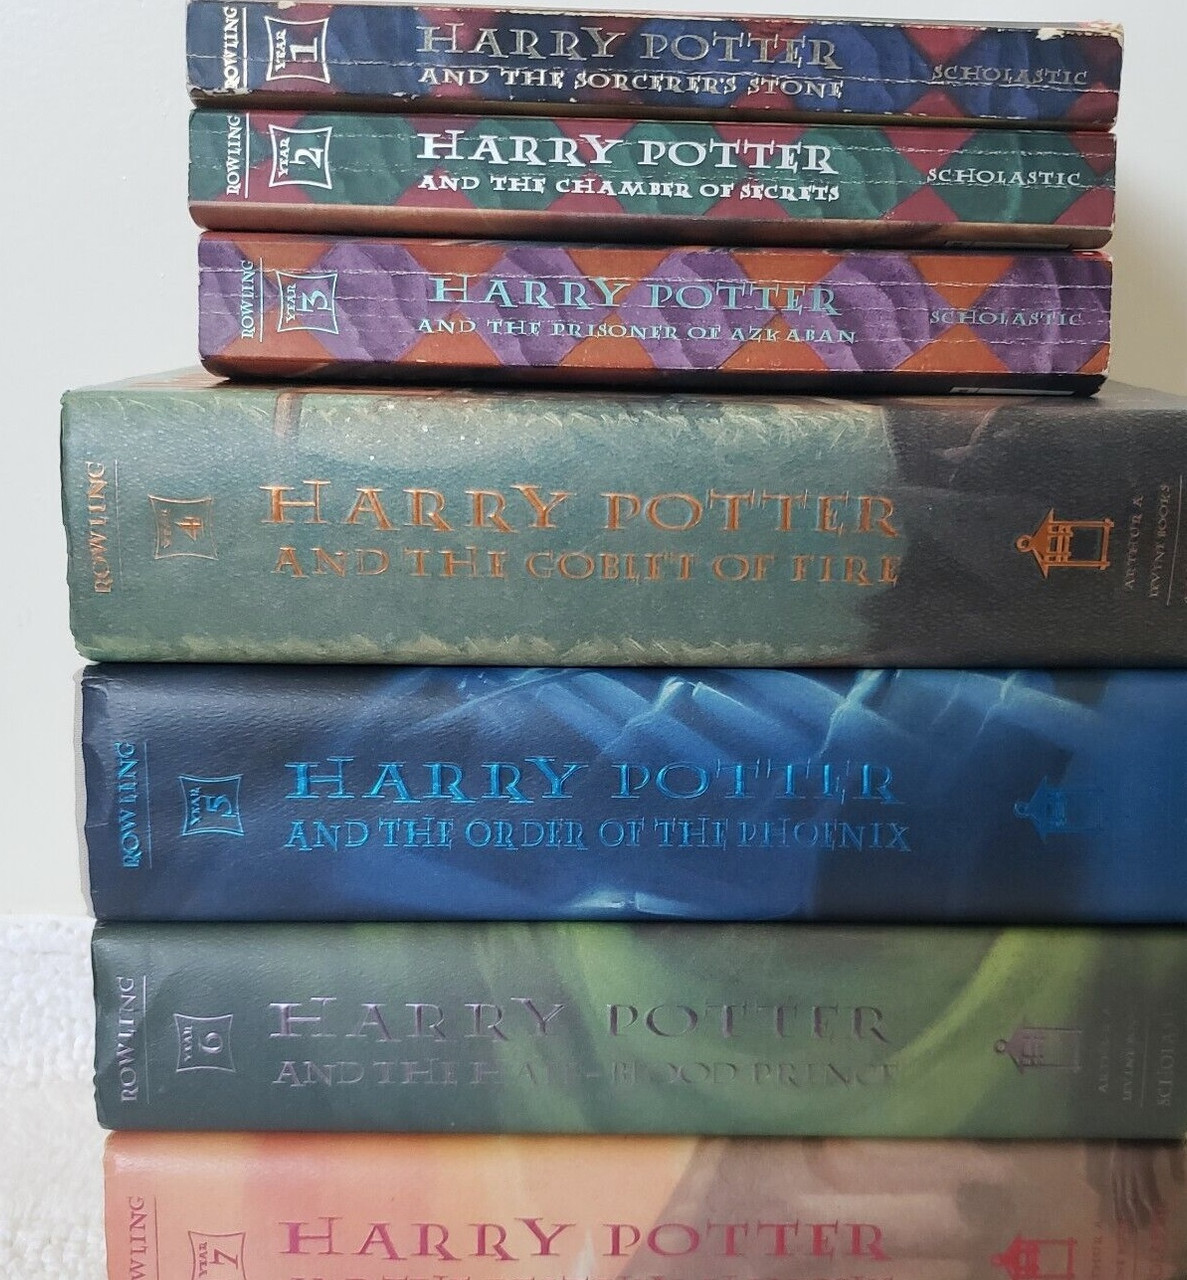 Harry Potter Full 7 Books Box Set Collection by J.K Rowling